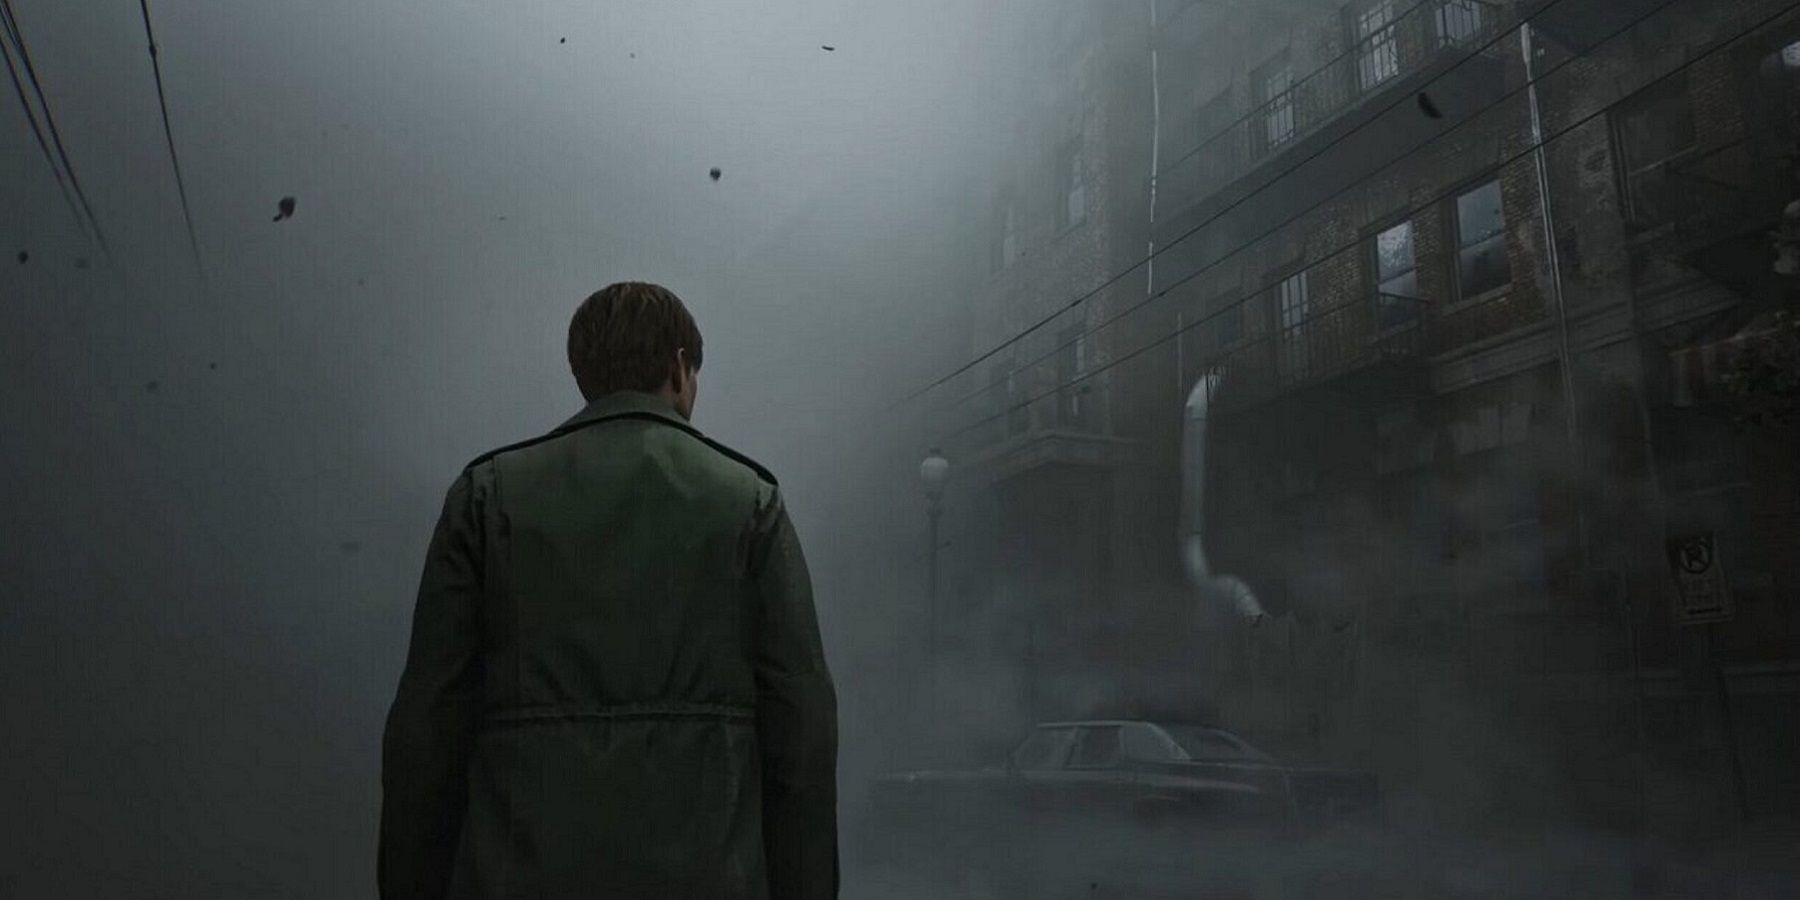 Silent Hill 2 returns with a remake, two new games, a movie, and